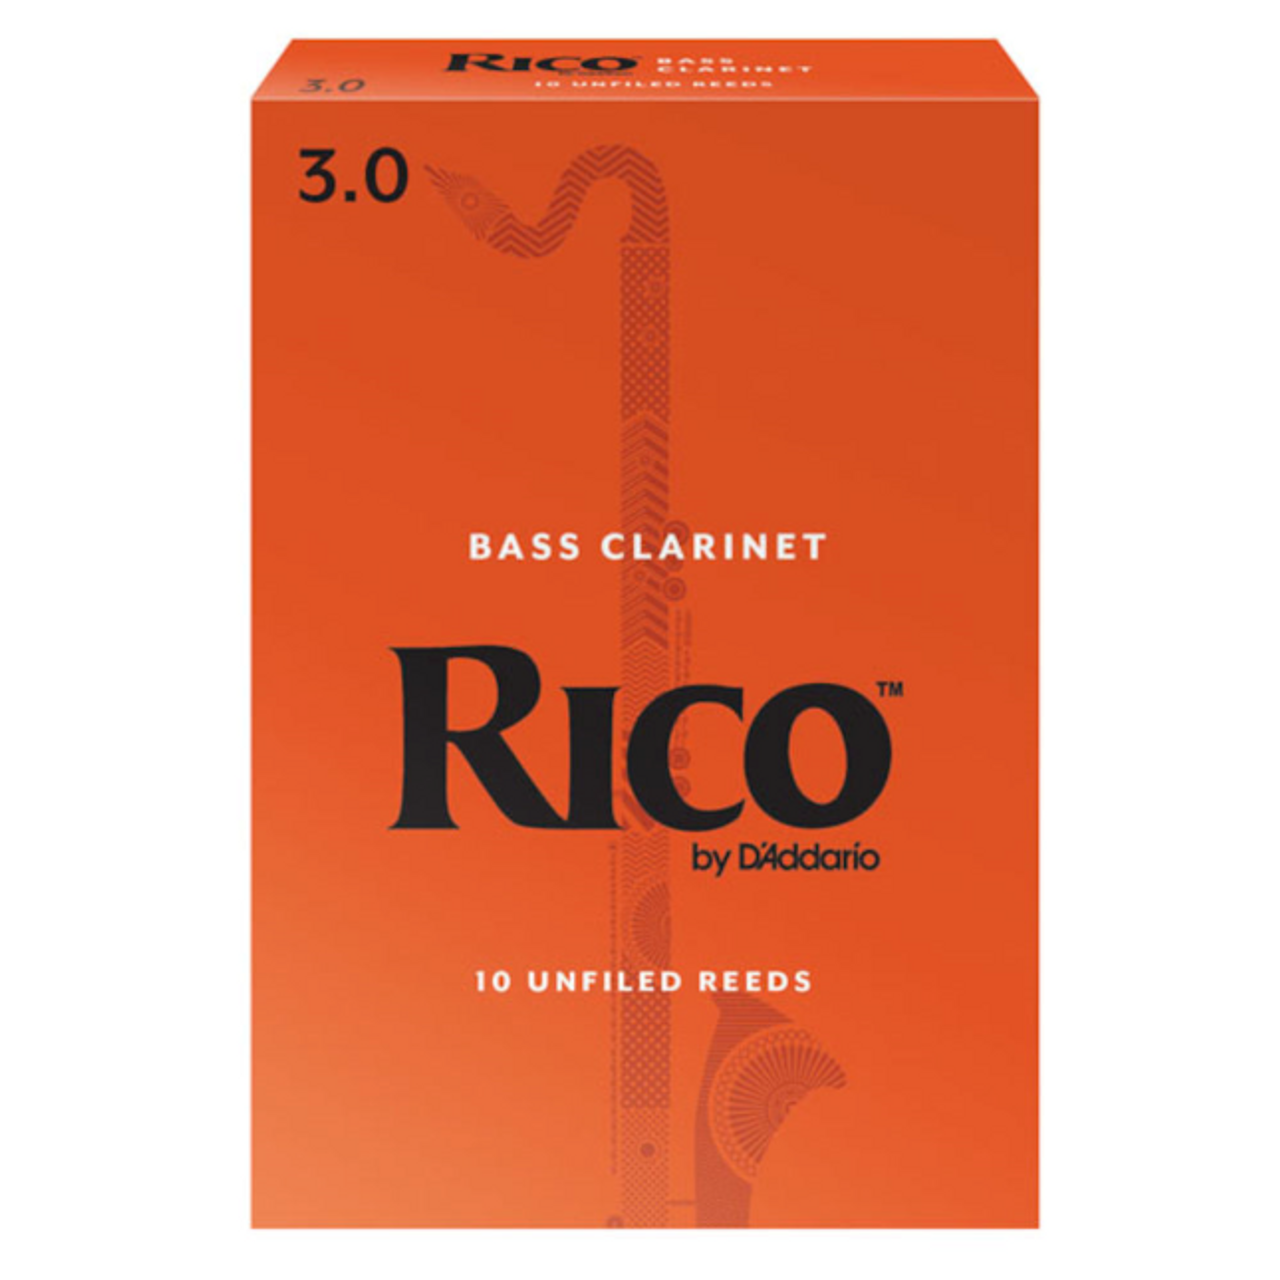 Rico by D'Addario Bass Clarinet Reeds, 25-pack